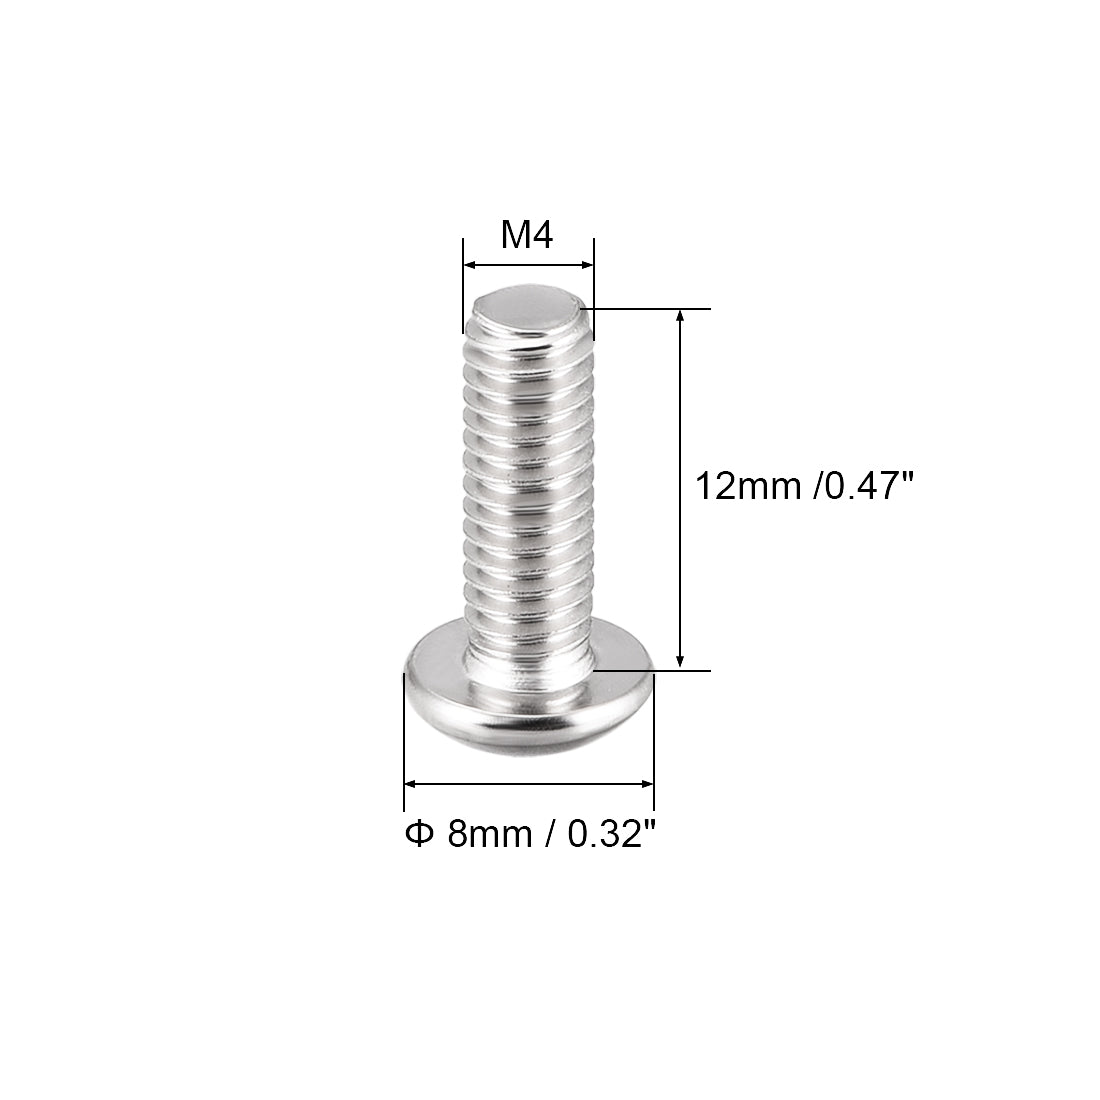 uxcell Uxcell M4x12mm Machine Screws Hex Socket Round Head Screw 304 Stainless Steel Fasteners Bolts 20pcs